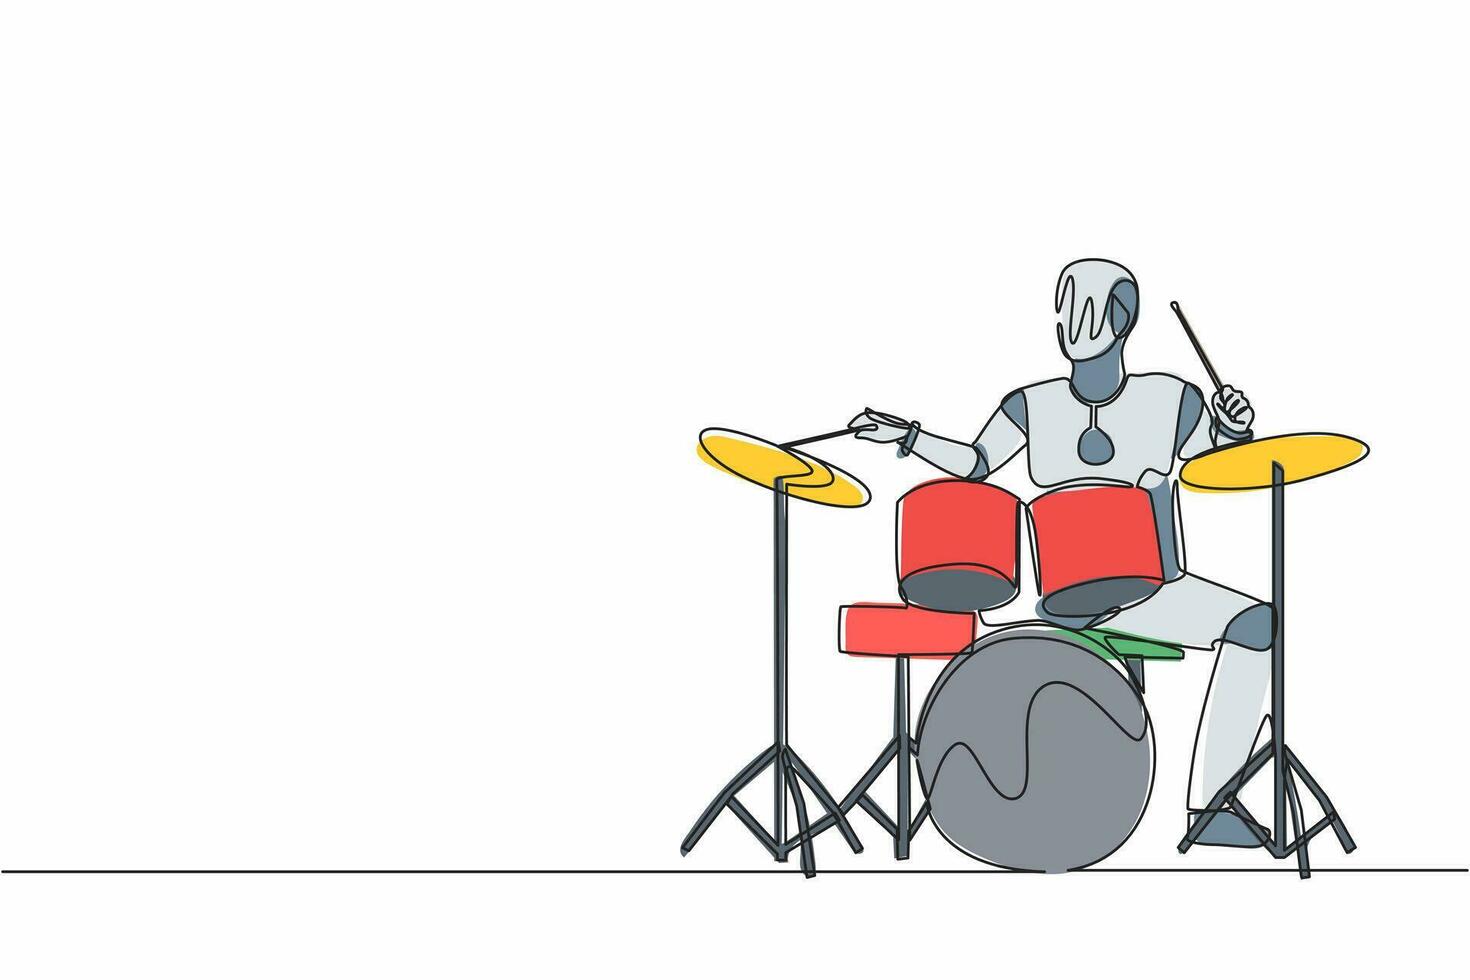 Single one line drawing robot playing drum instrument at music pop concert. Future technology development. Artificial intelligence and machine learning. Continuous line draw design vector illustration